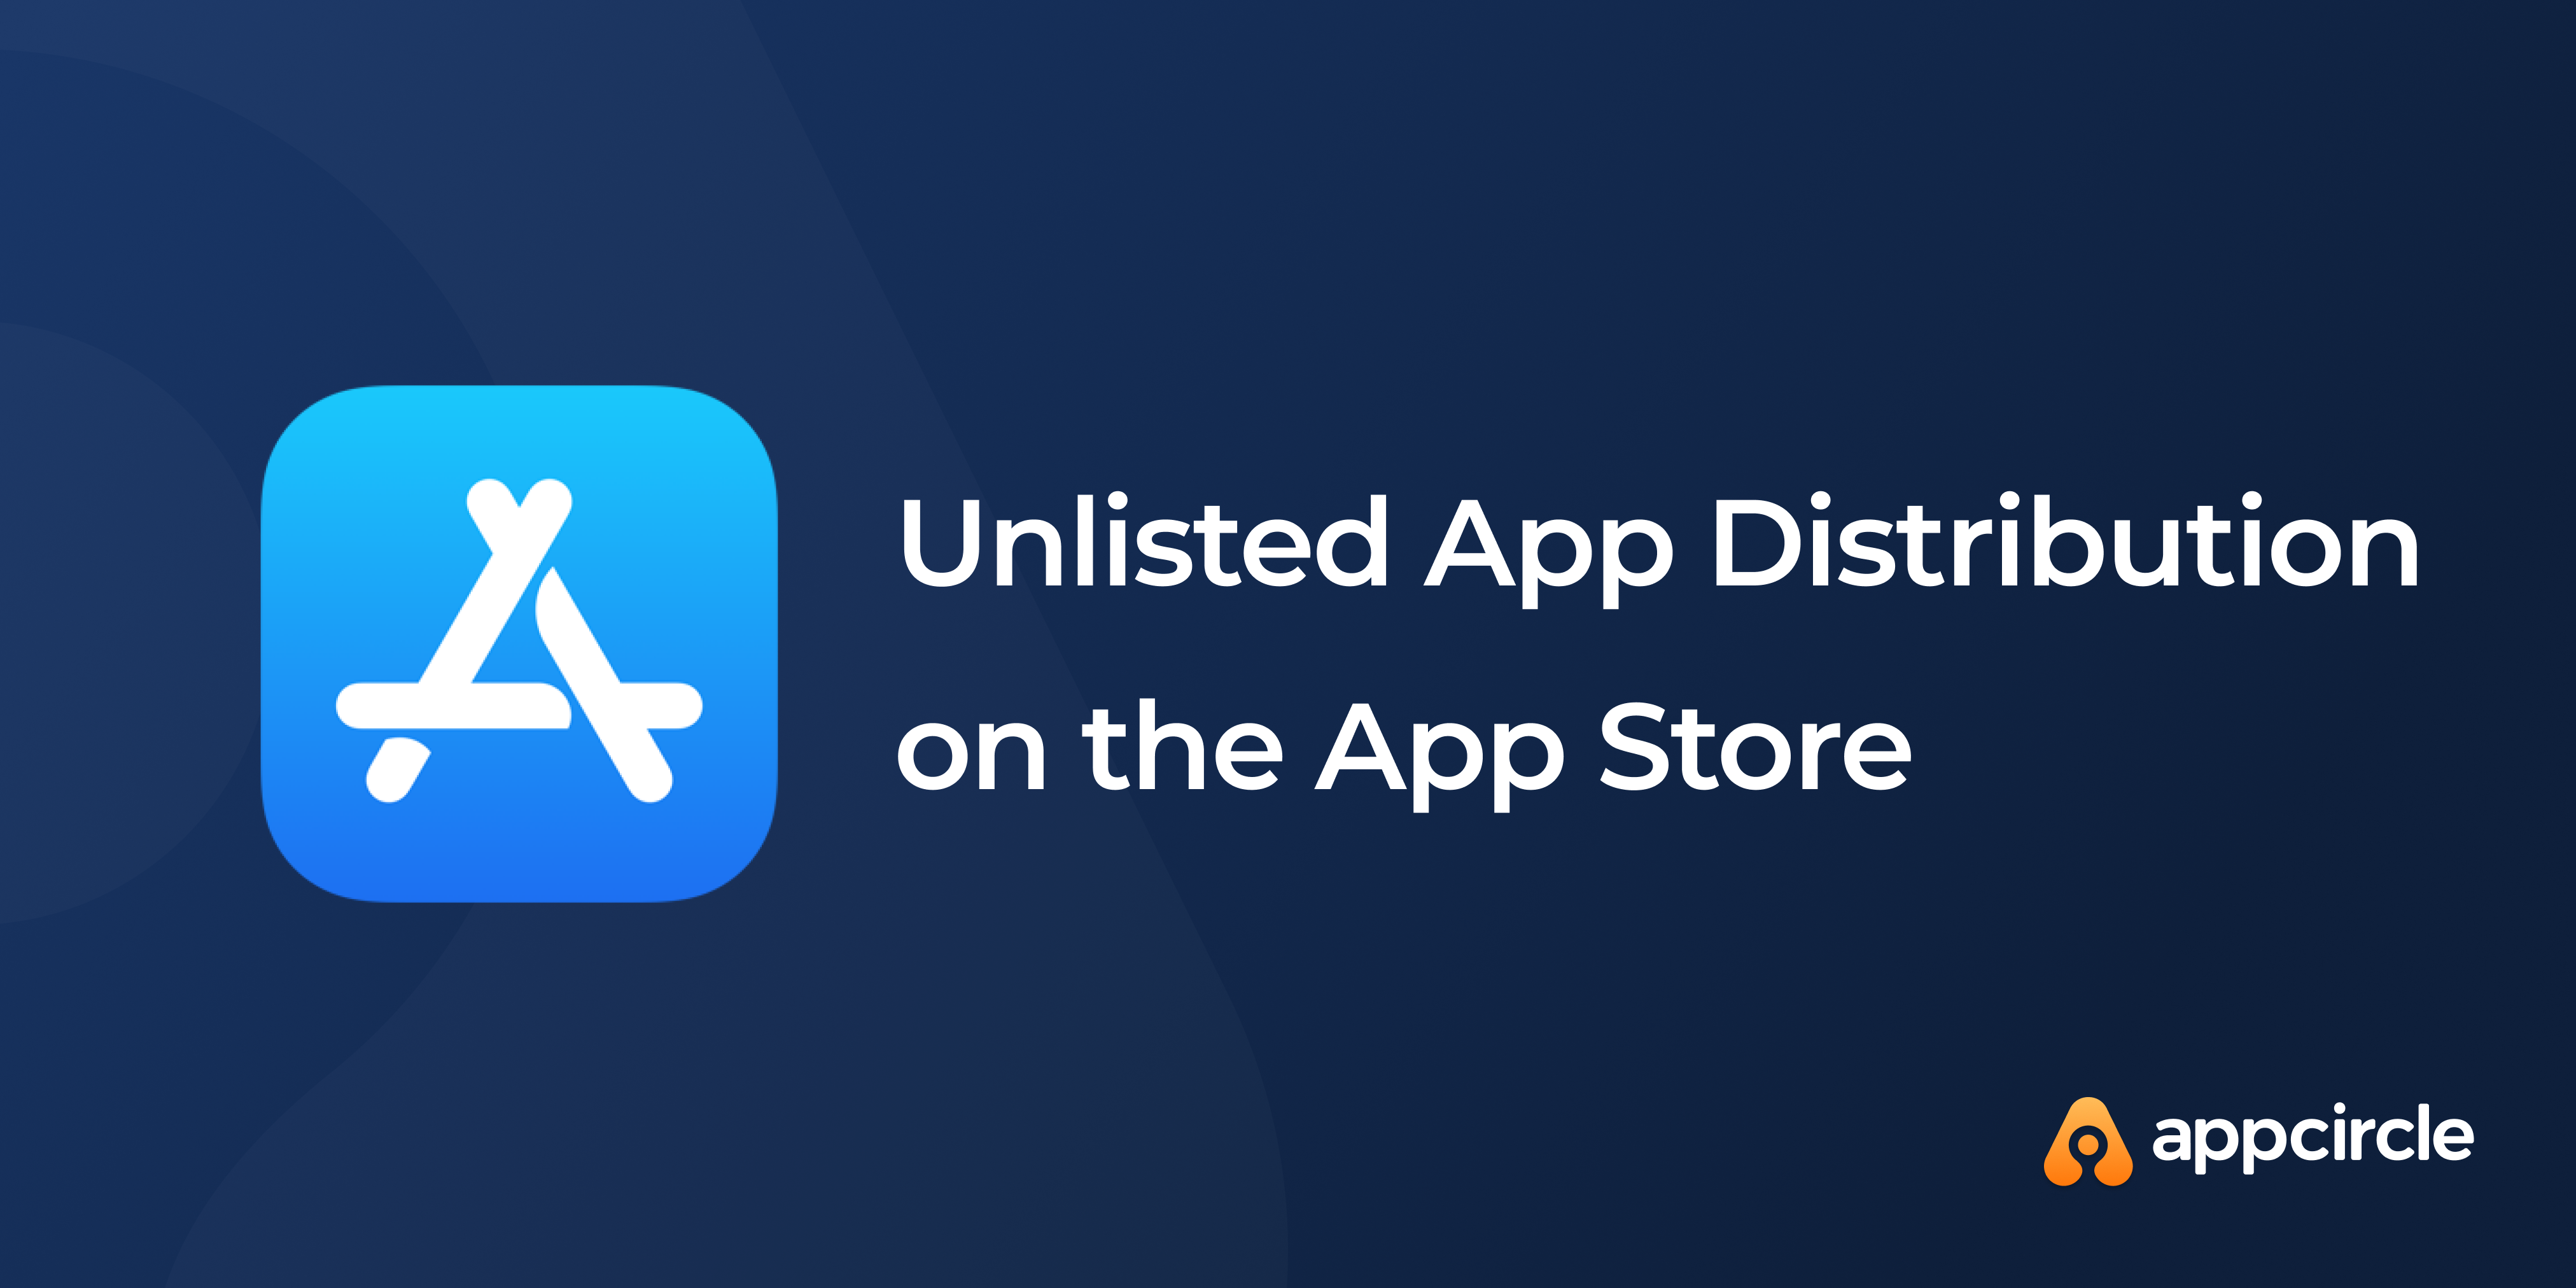 Unlisted App Distribution on the App Store